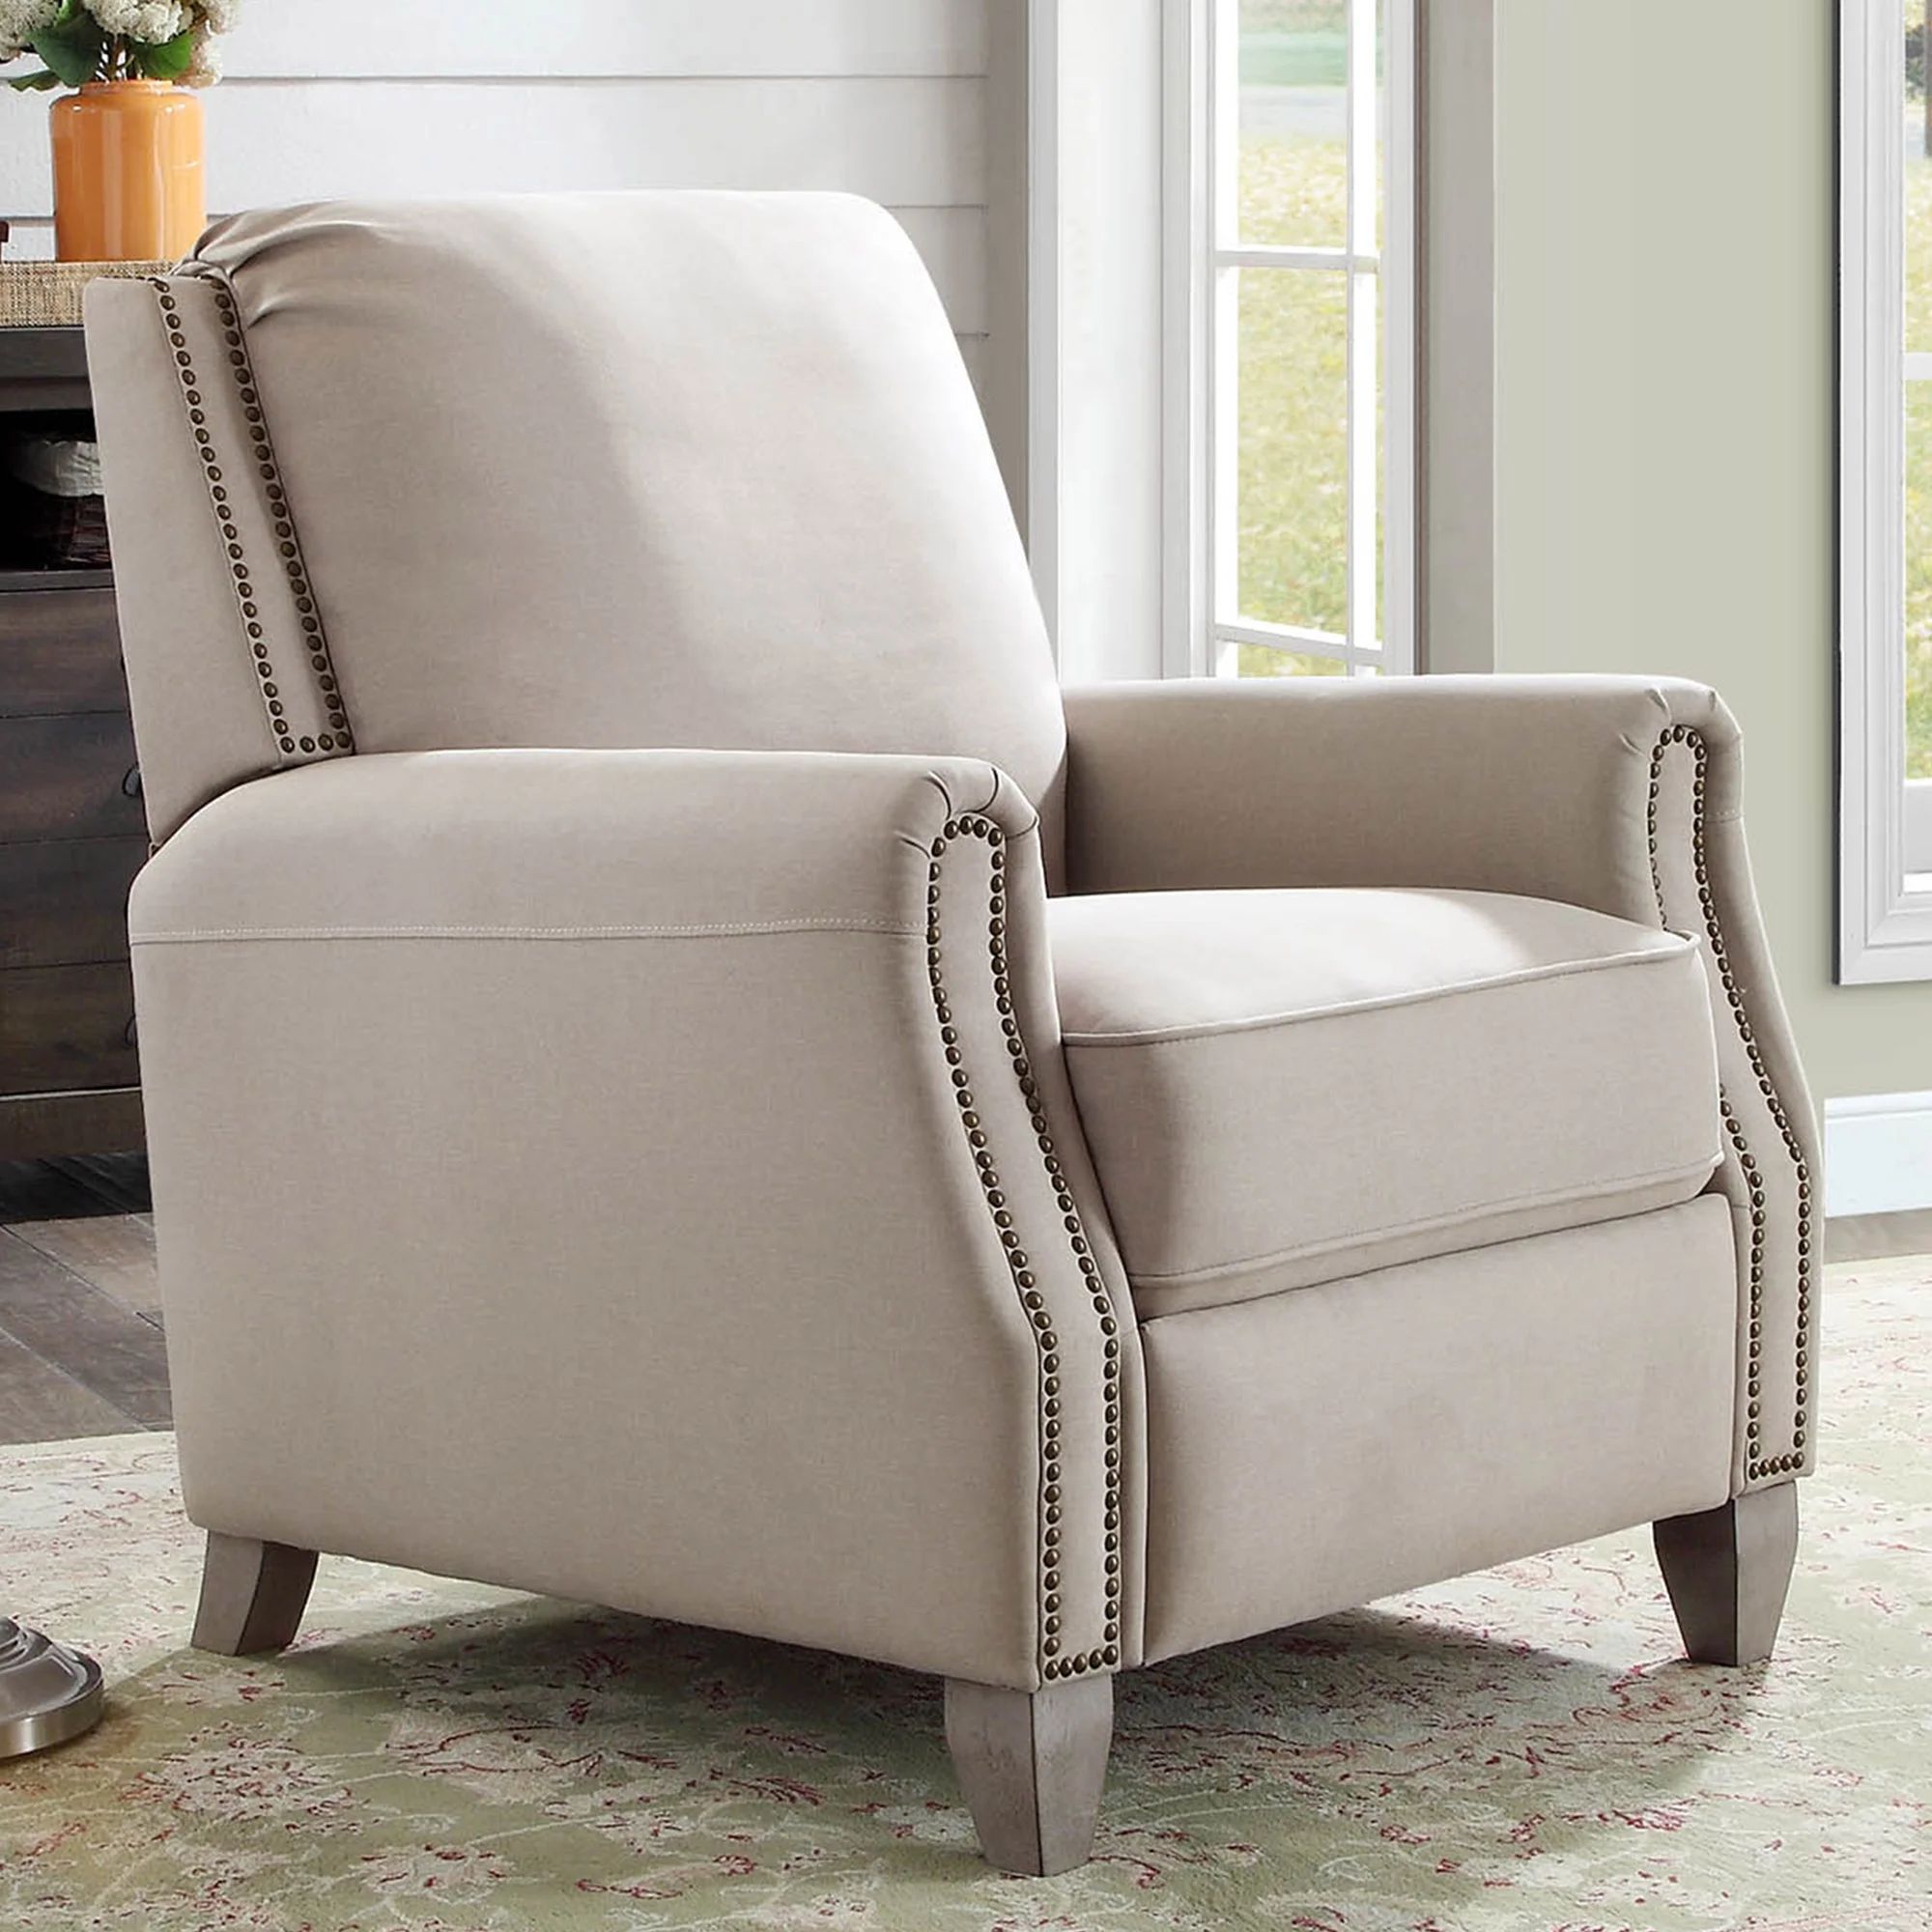 Better Homes & Gardens Pushback Recliner, Taupe Fabric Upholstery with Bronze Nail-Head Trim | Walmart (US)